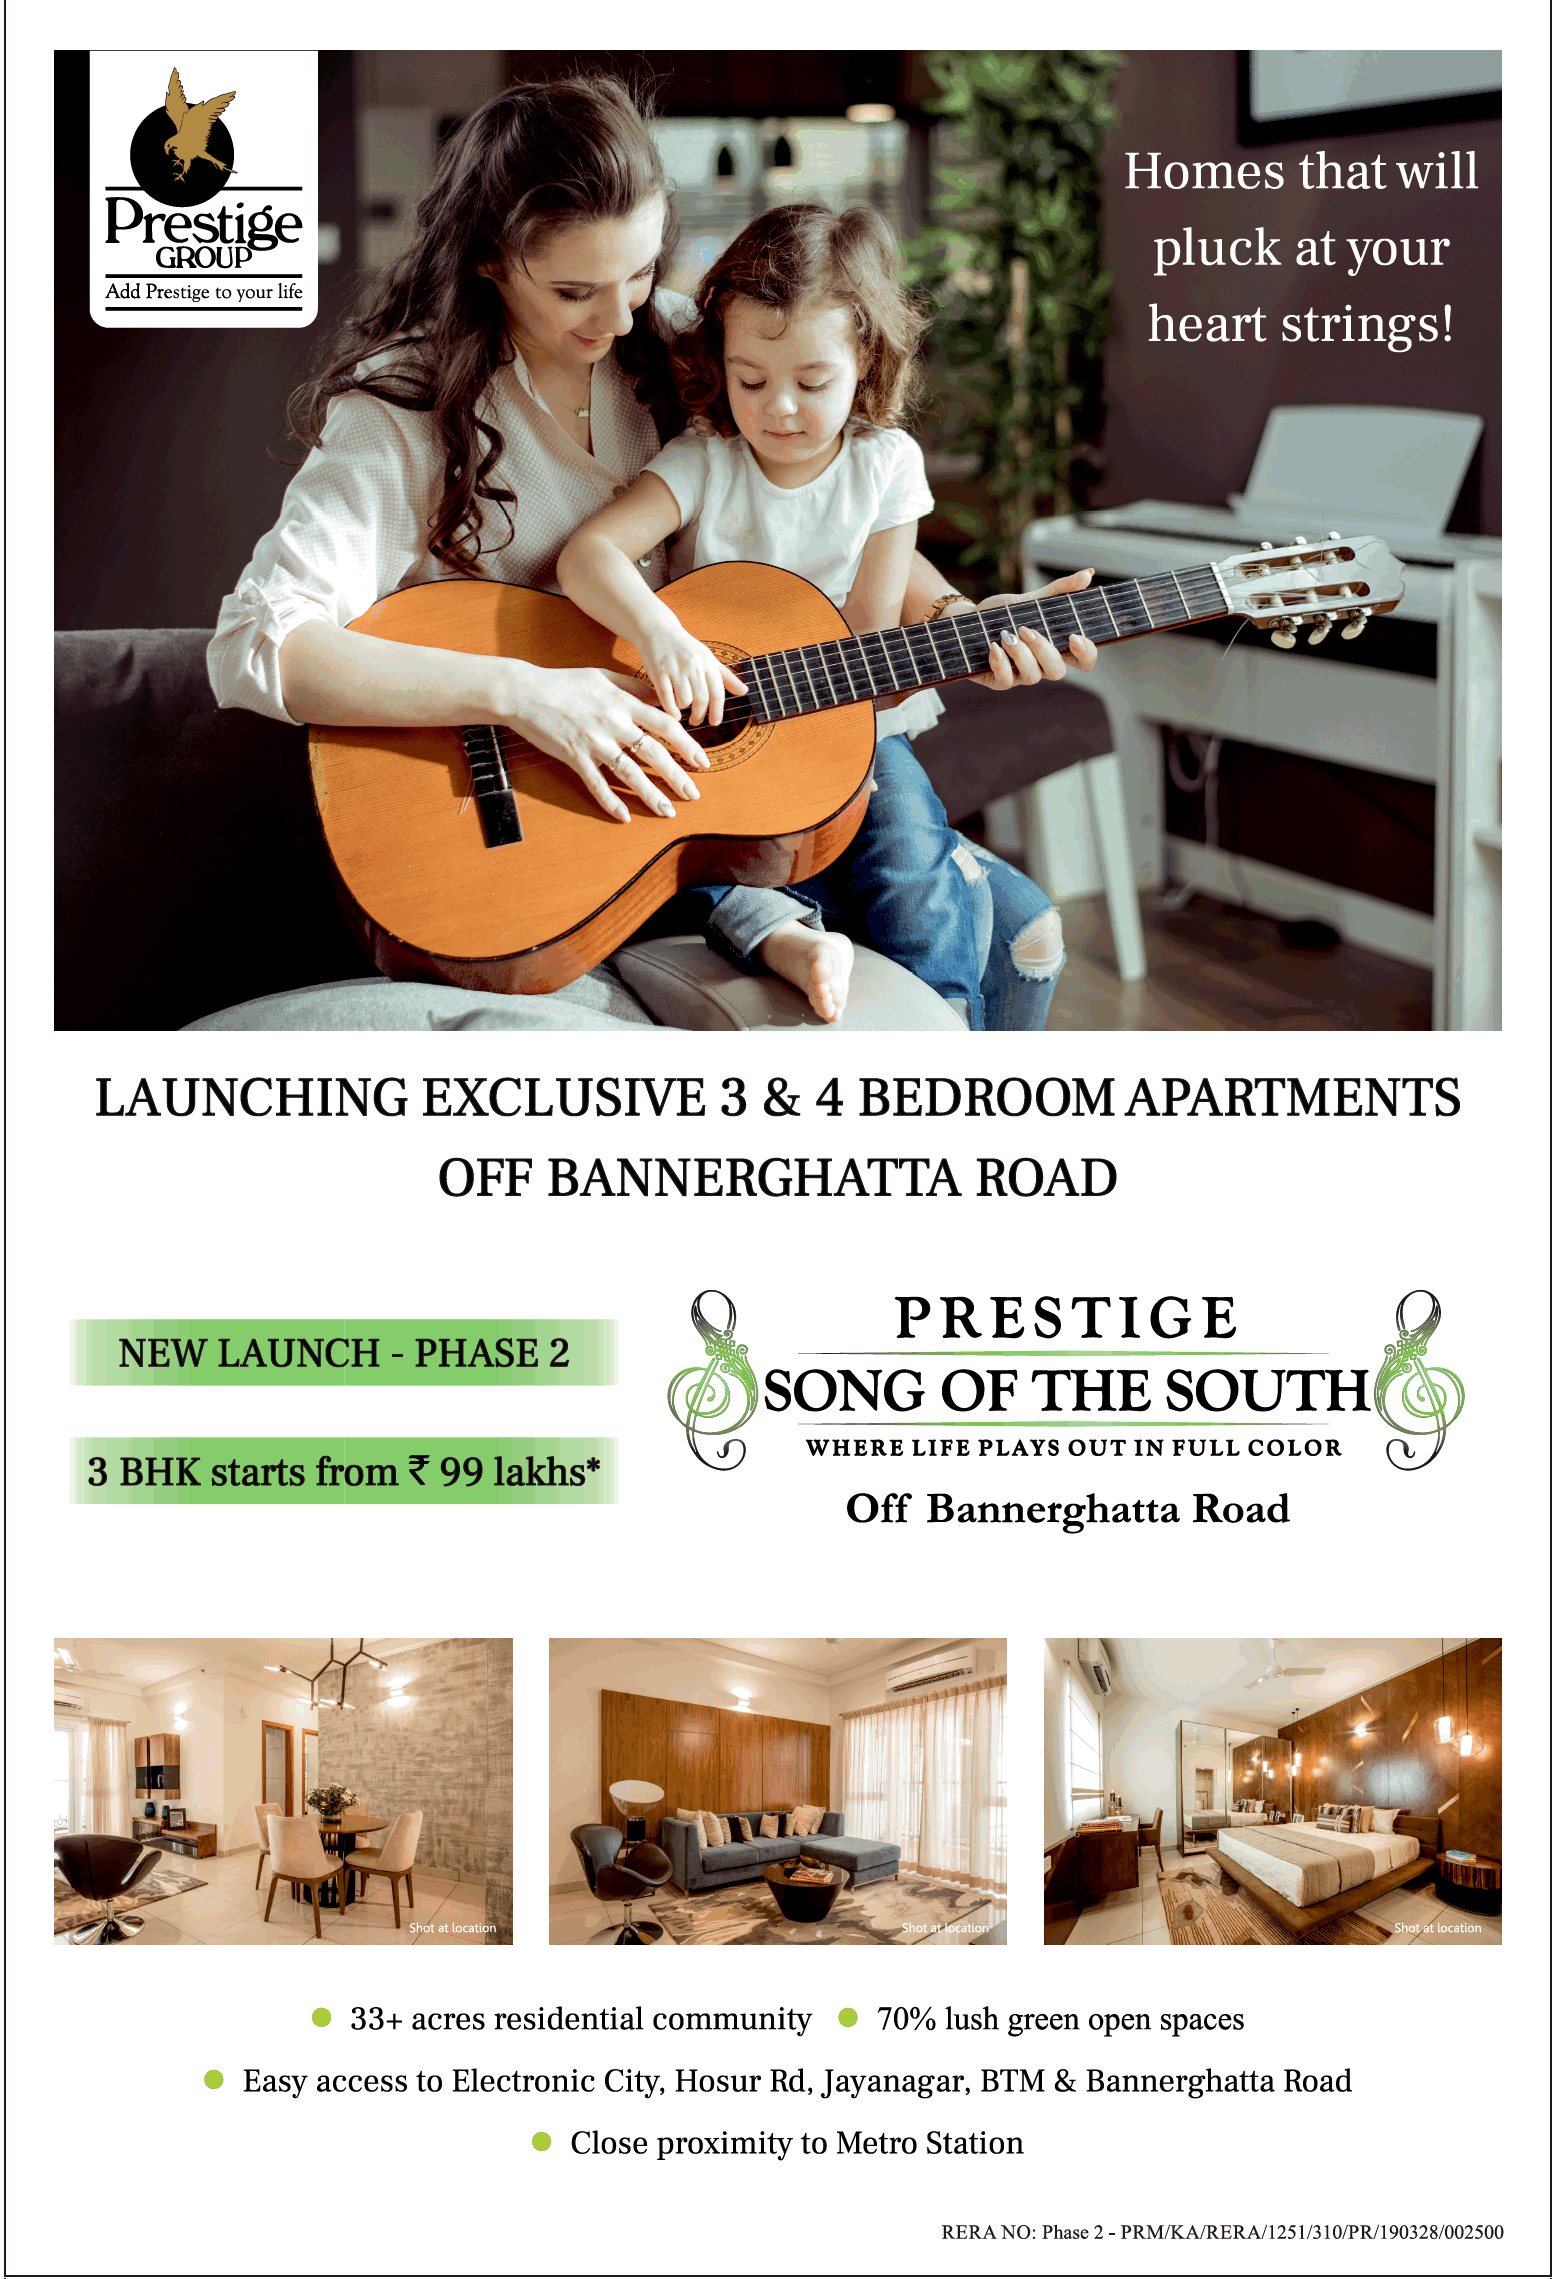 Launching exclusive 3 & 4 bedroom apartments at Prestige Song of the South in Bangalore